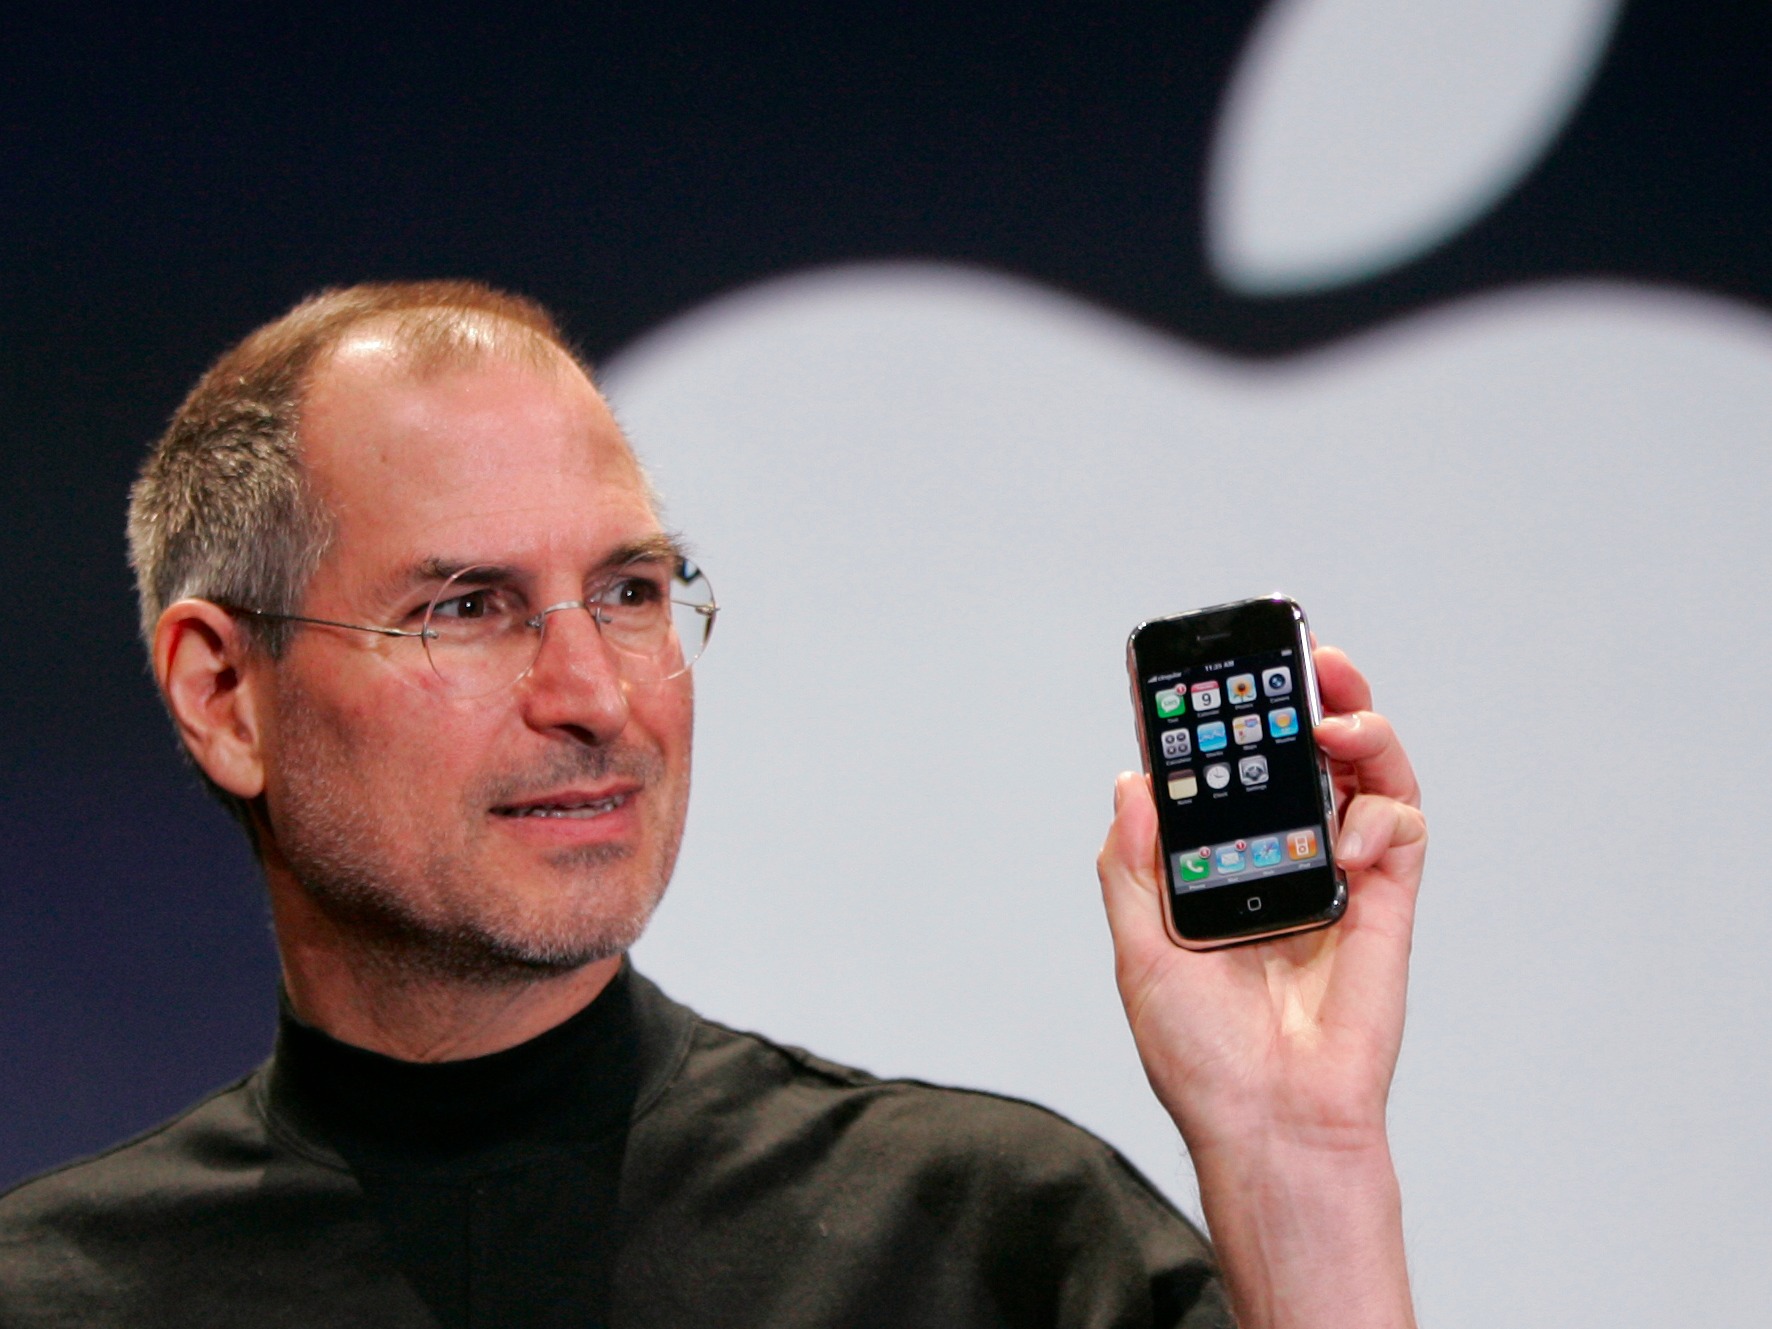 Original iphone announcement by Steve Jobs in 2007